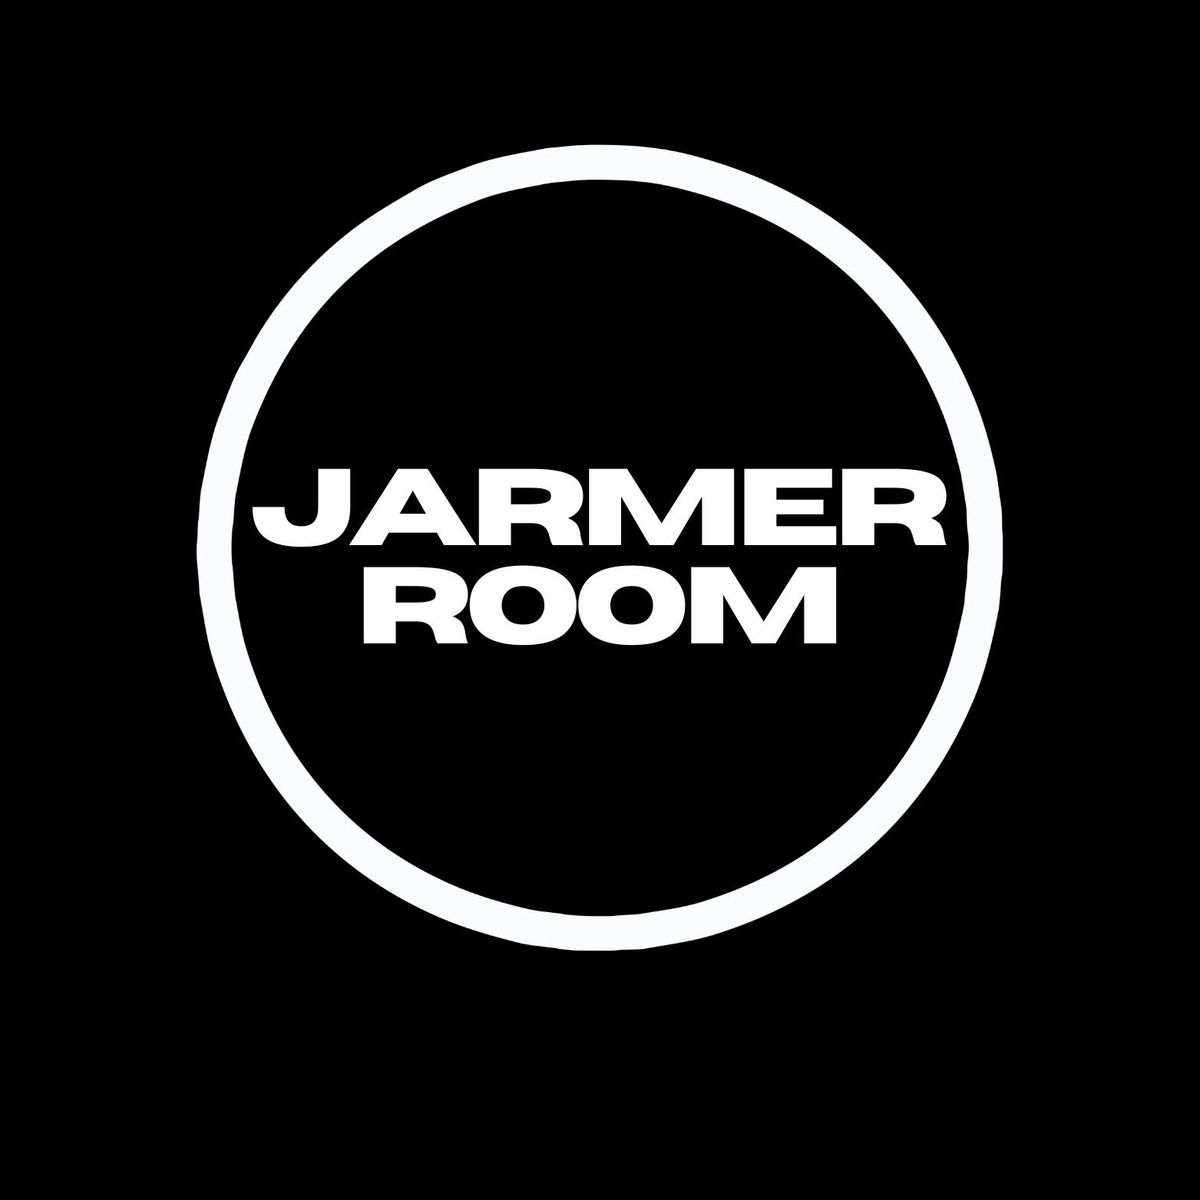 The Jarmer Room Sessions